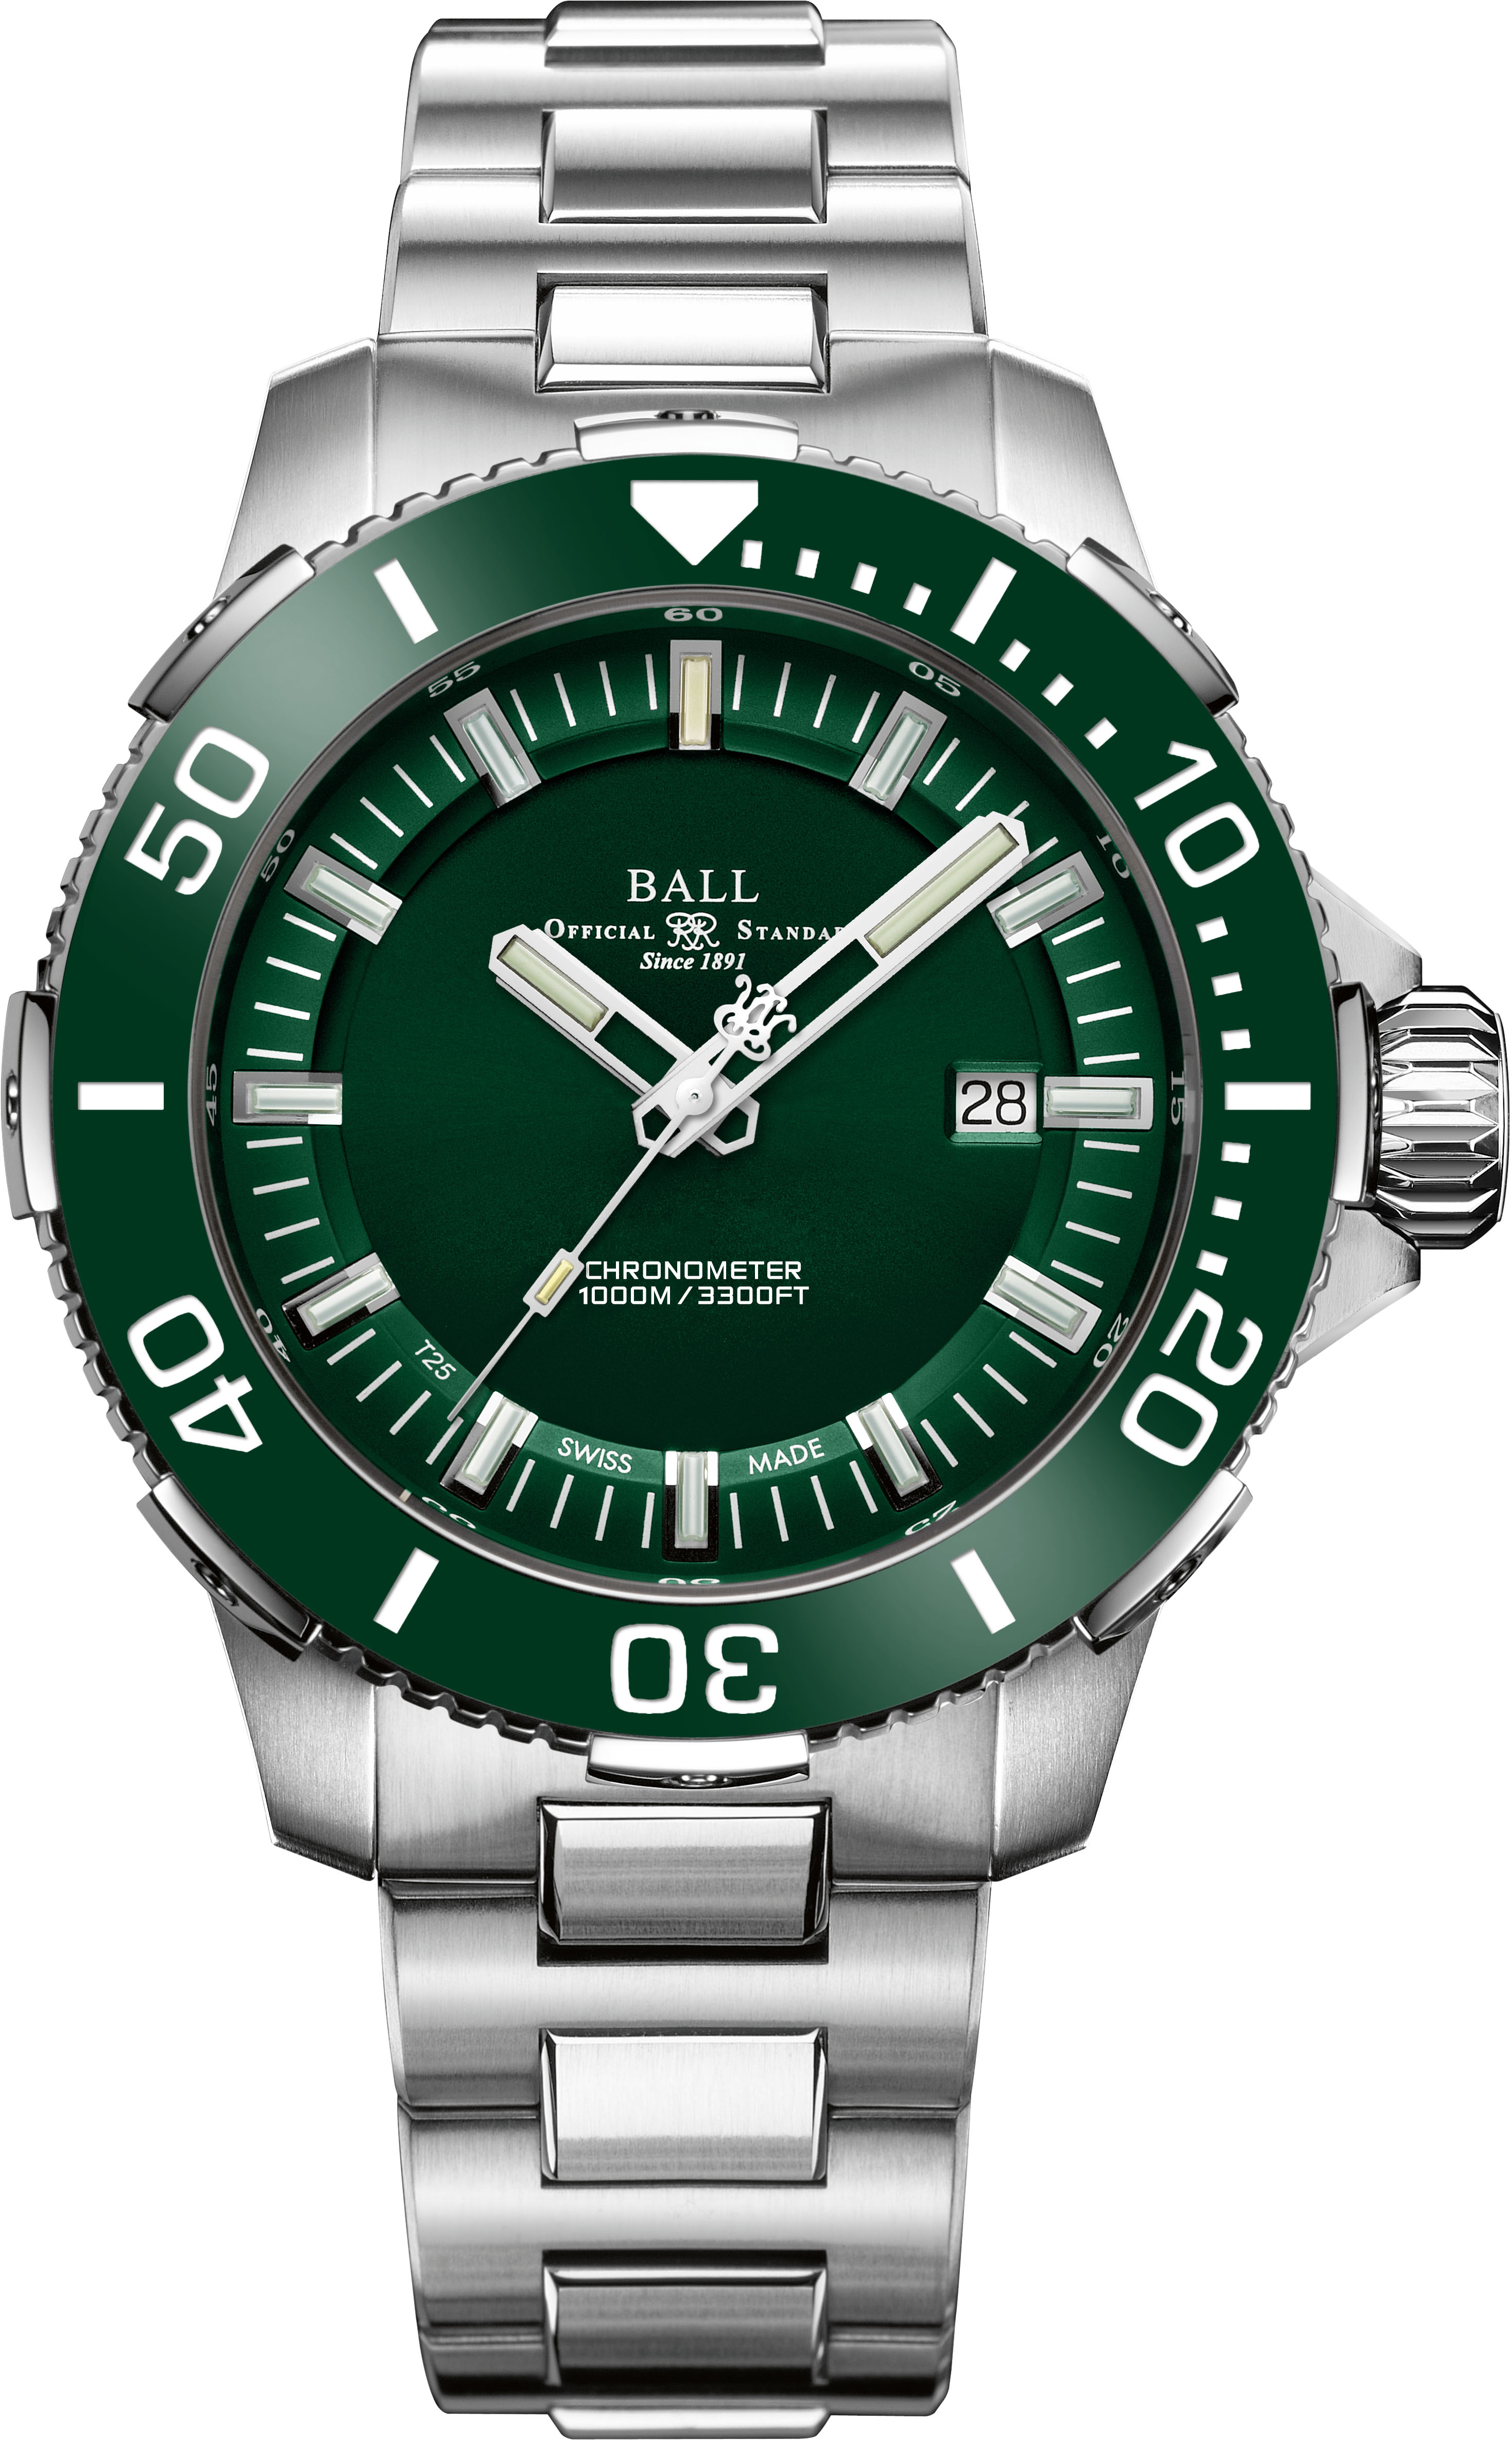 The Ball Engineer Hydrocarbon DeepQUEST Ceramic